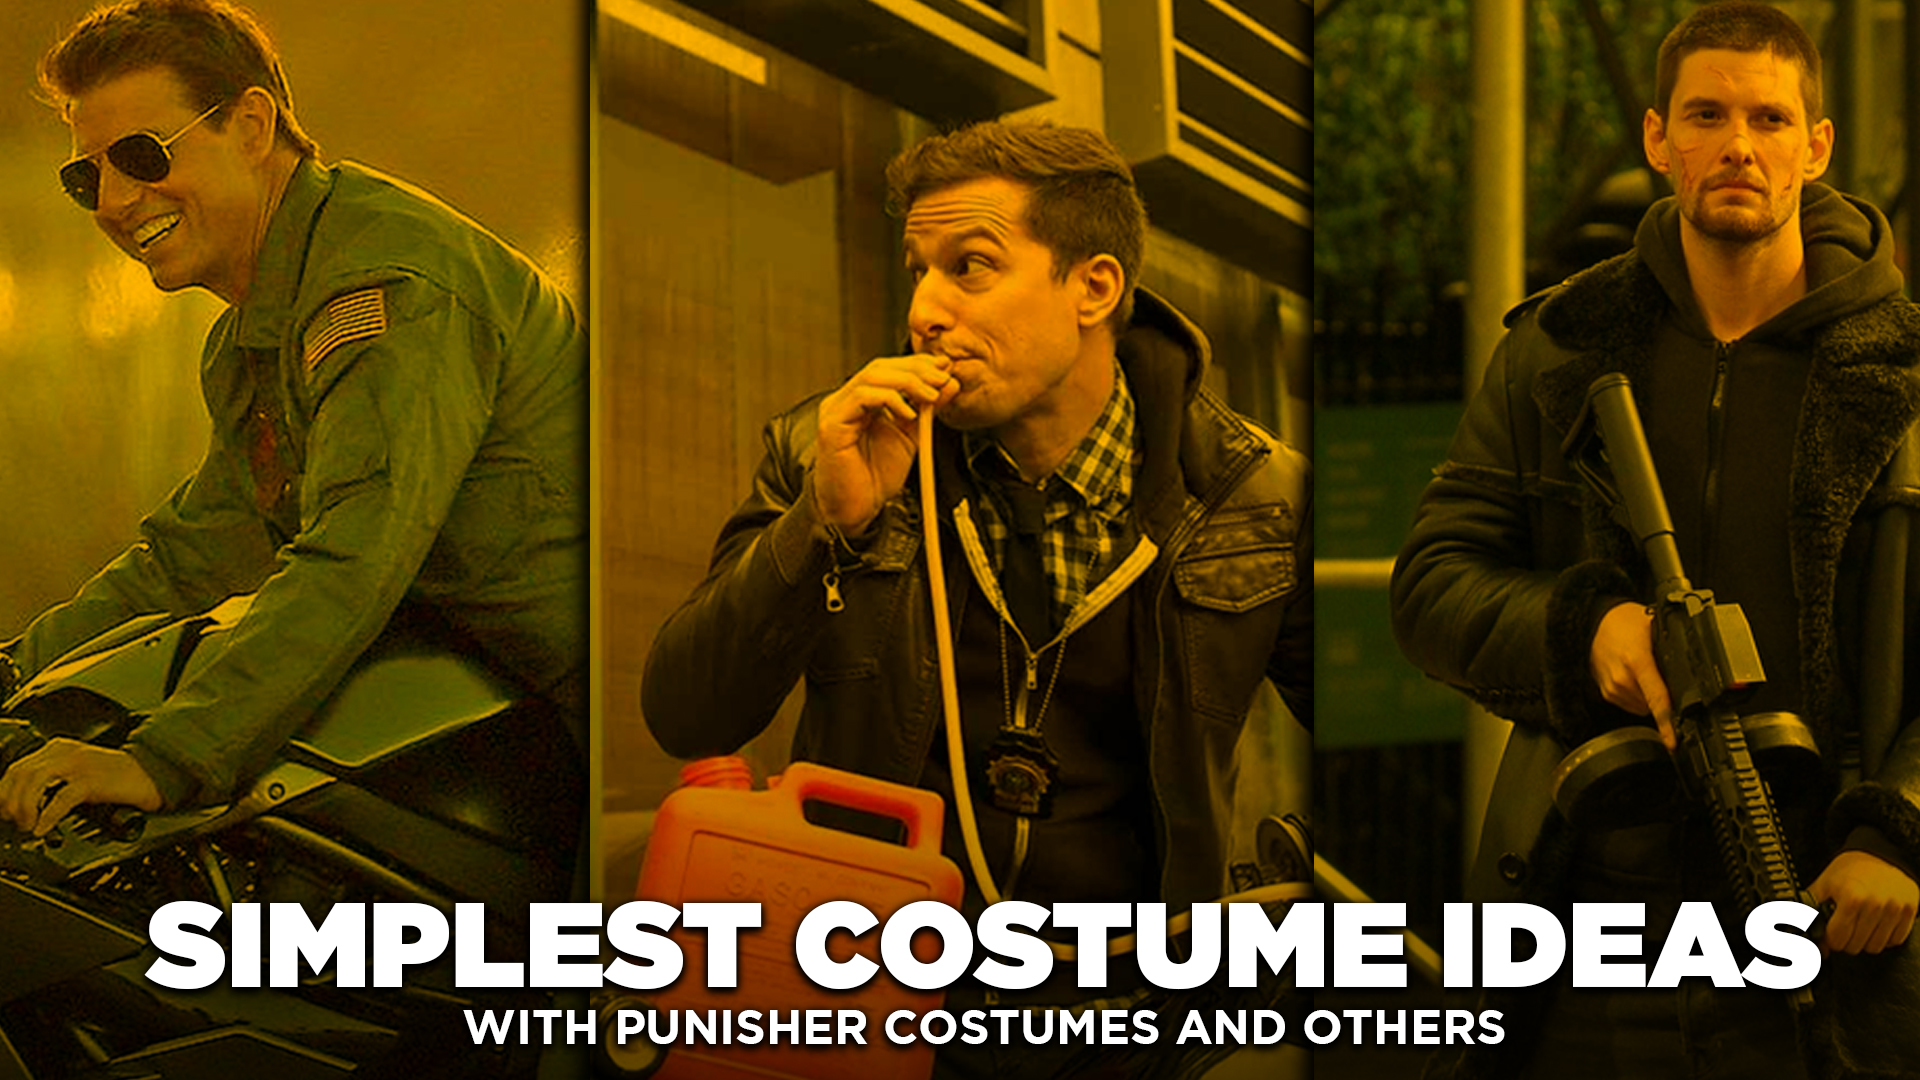 Simplest Costume Ideas With Punisher Costumes And Others